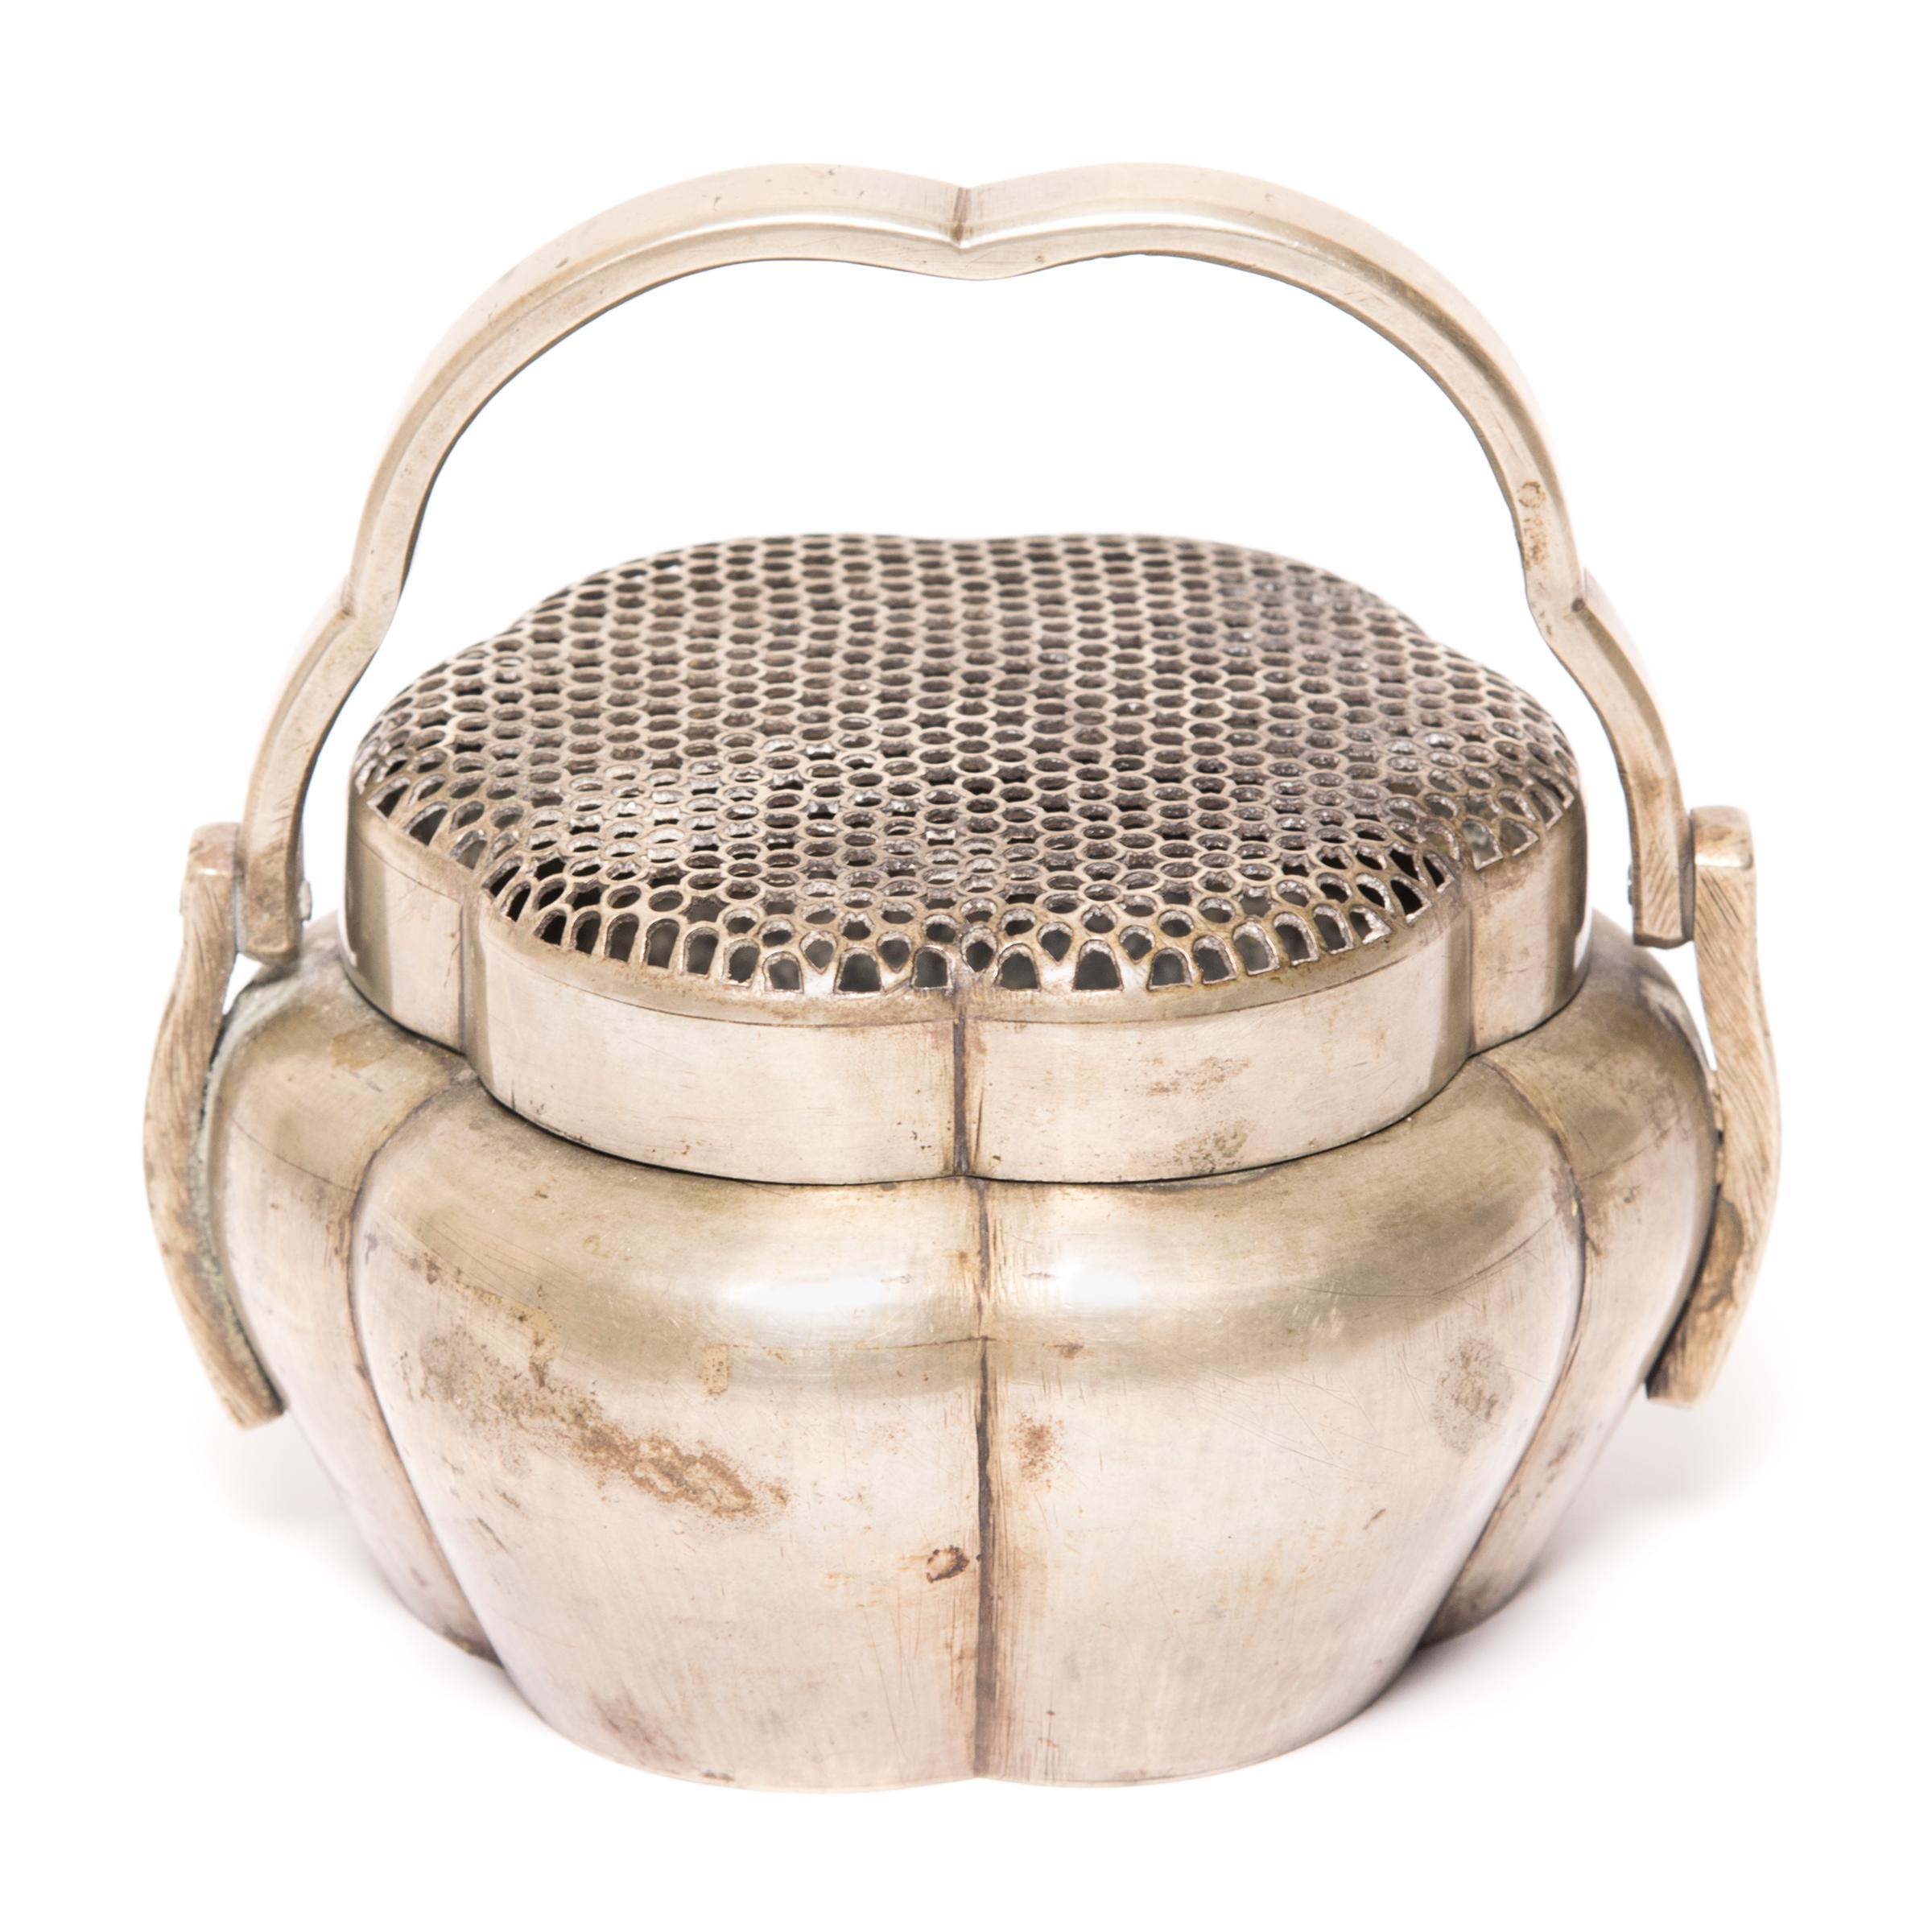 Filled with burning coals, each of these exquisitely crafted 19th century braziers once warmed the cold hands of a wealthy woman on a winter night in Northern China. The precisely pierced lids, designed to let heat waft over cold hands, add texture